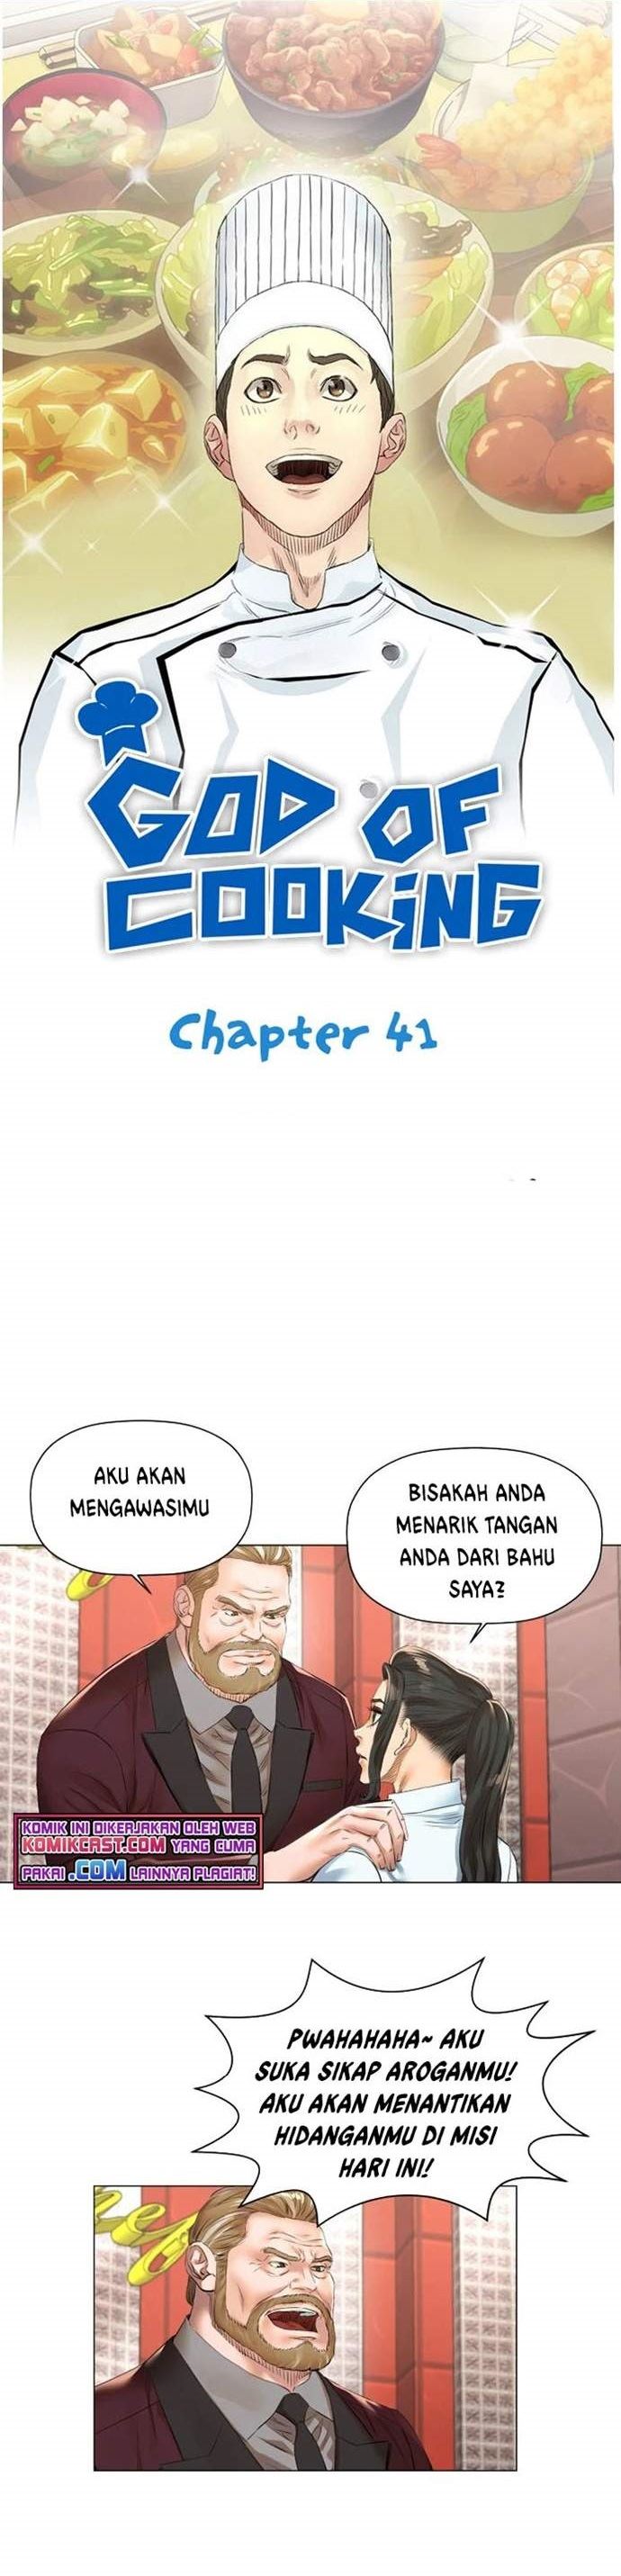 God of Cooking Chapter 41